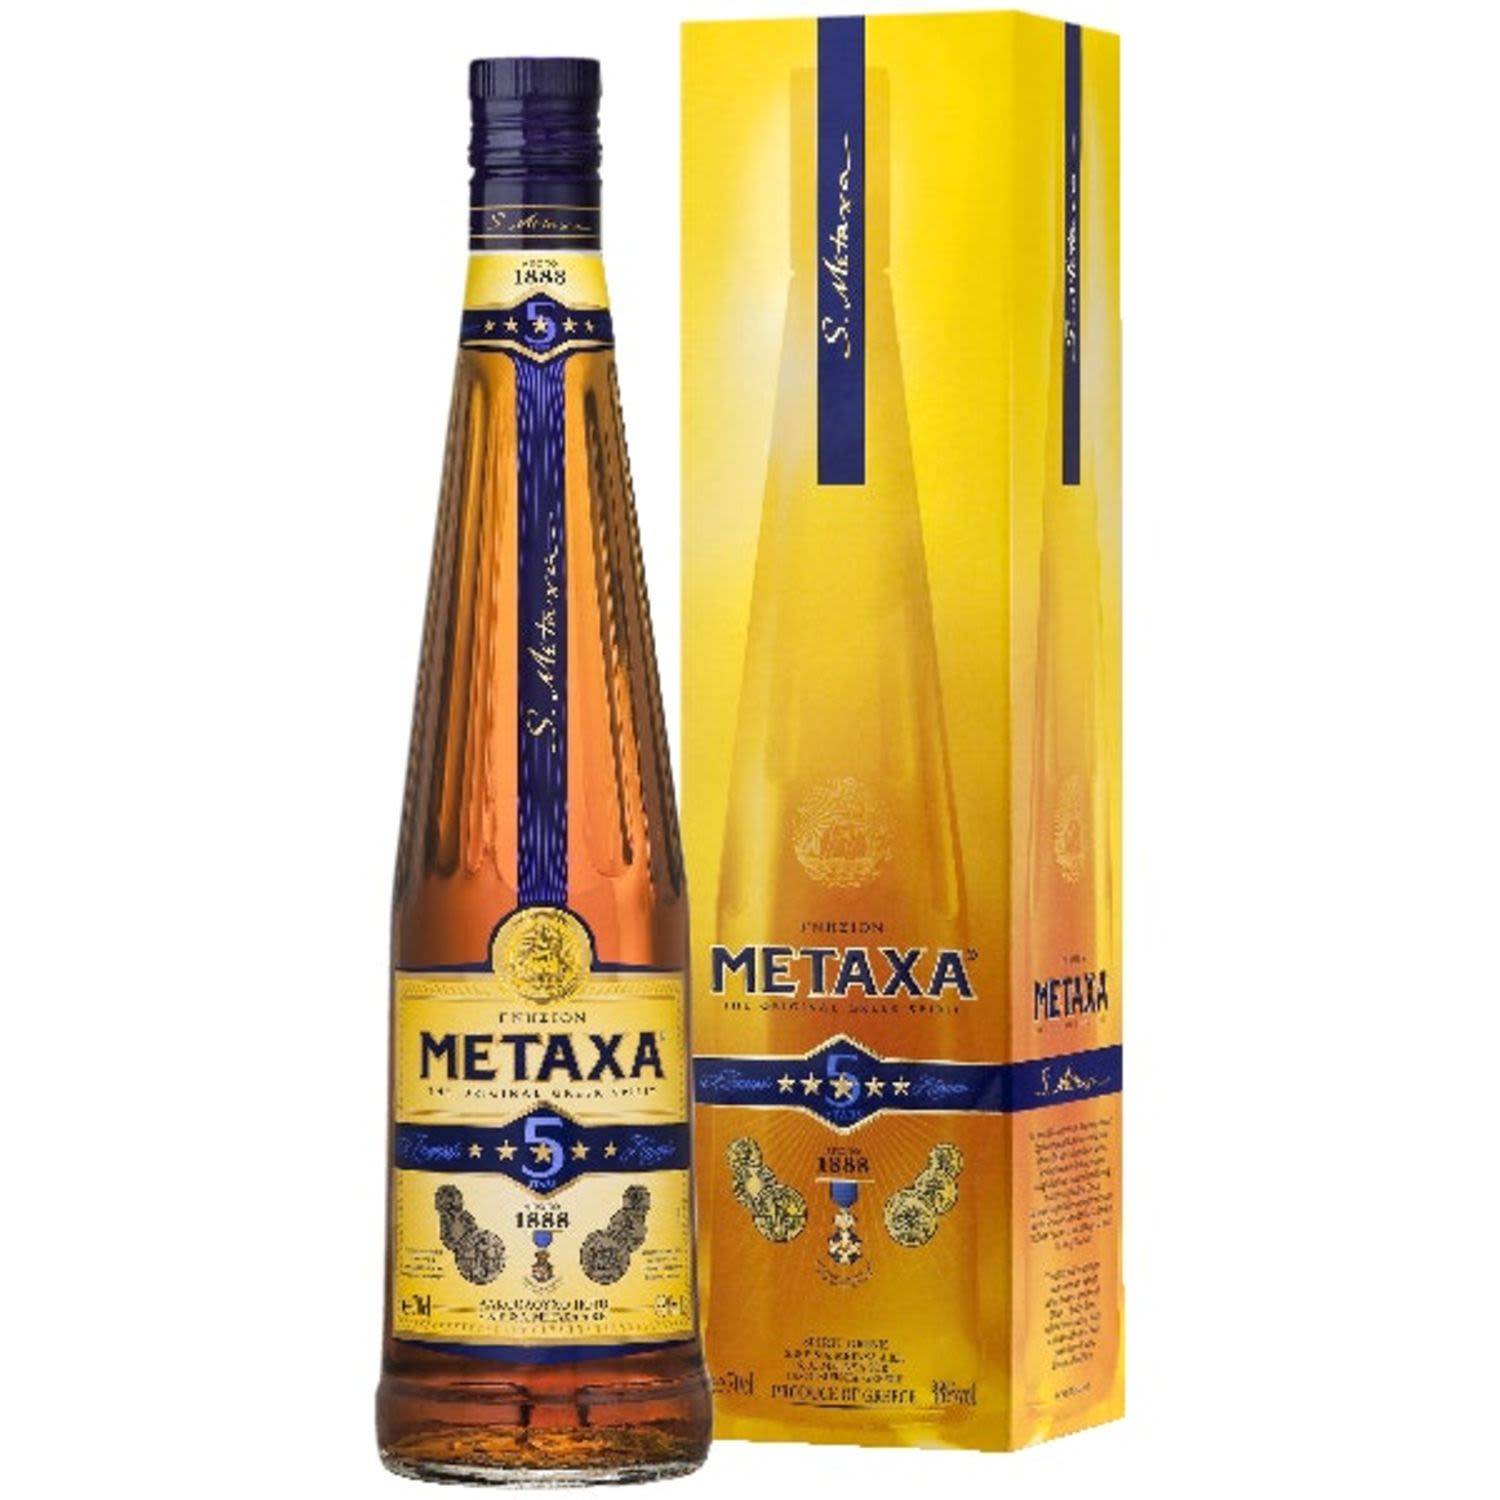 Metaxa 5 Stars is a beautifully balanced marriage between ­fine wine distillates matured up to ­five years in oak casks and Muscat wines from the Aegean Islands.<br /> <br />Alcohol Volume: 40.00%<br /><br />Pack Format: Bottle<br /><br />Standard Drinks: 22.1</br /><br />Pack Type: Bottle<br /><br />Country of Origin: Greece<br />